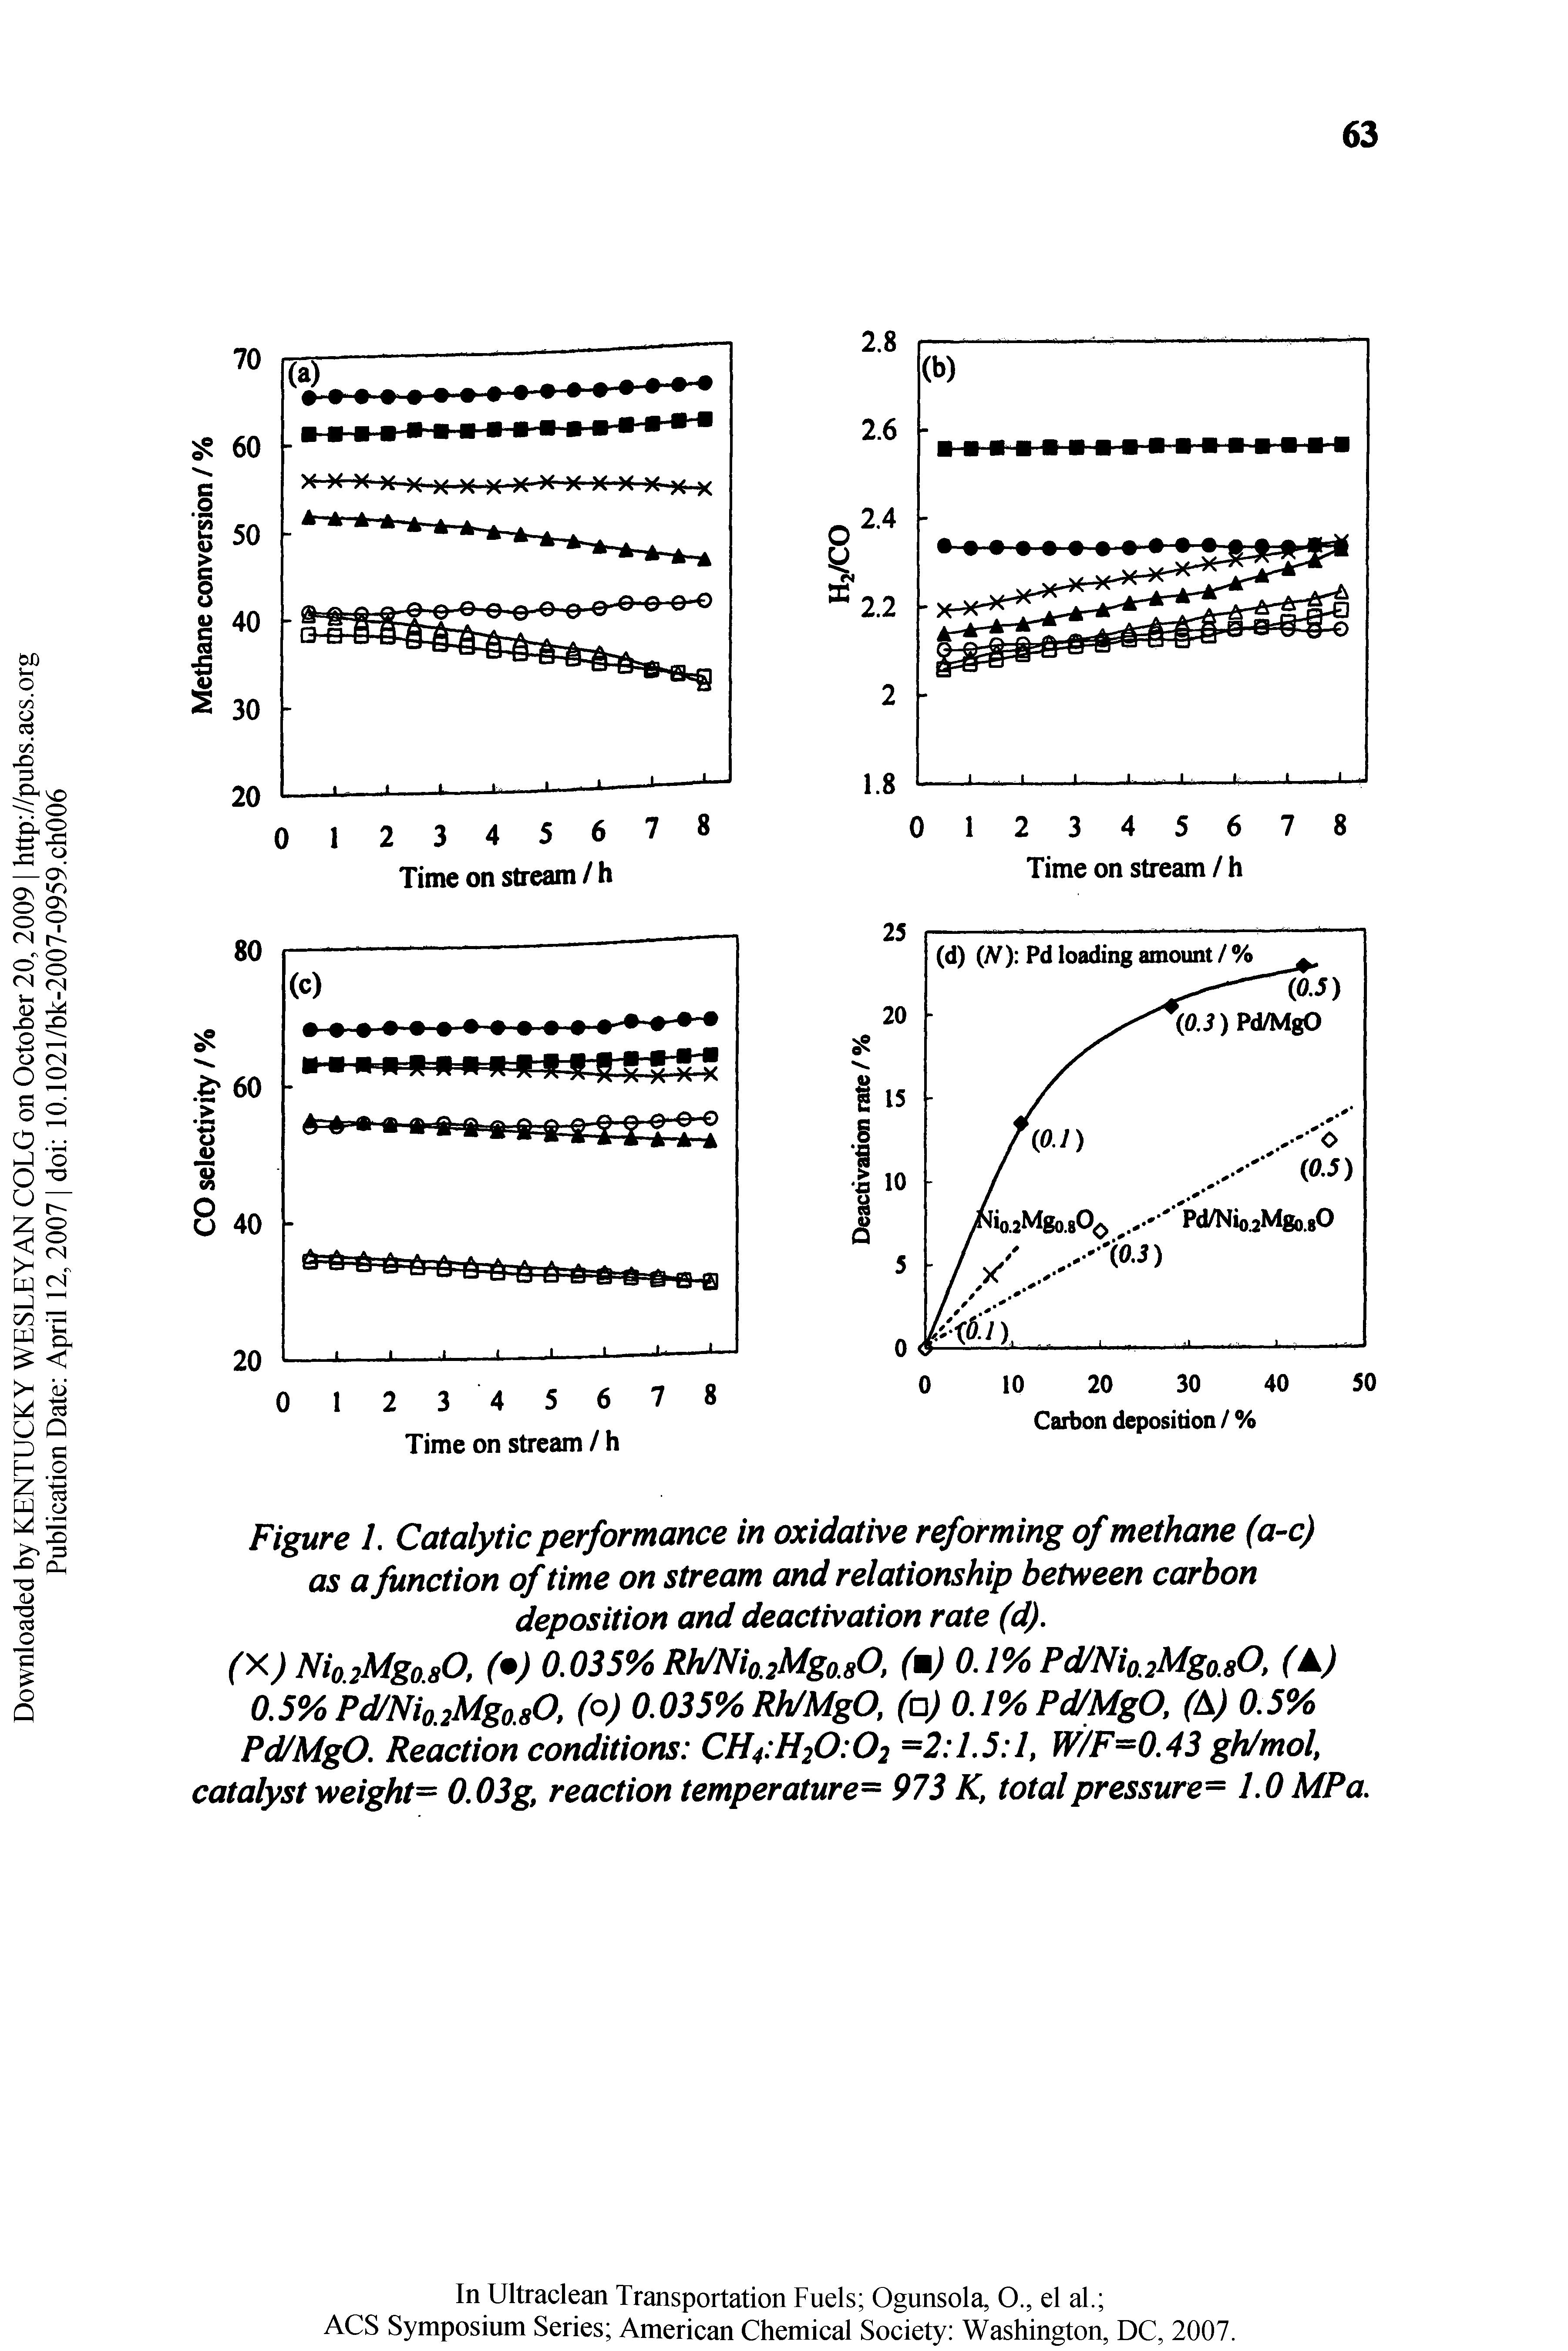 Figure I. Catalytic performance in oxidative reforming of methane (a-c) as a function of time on stream and relationship between carbon deposition and deactivation rate (d).